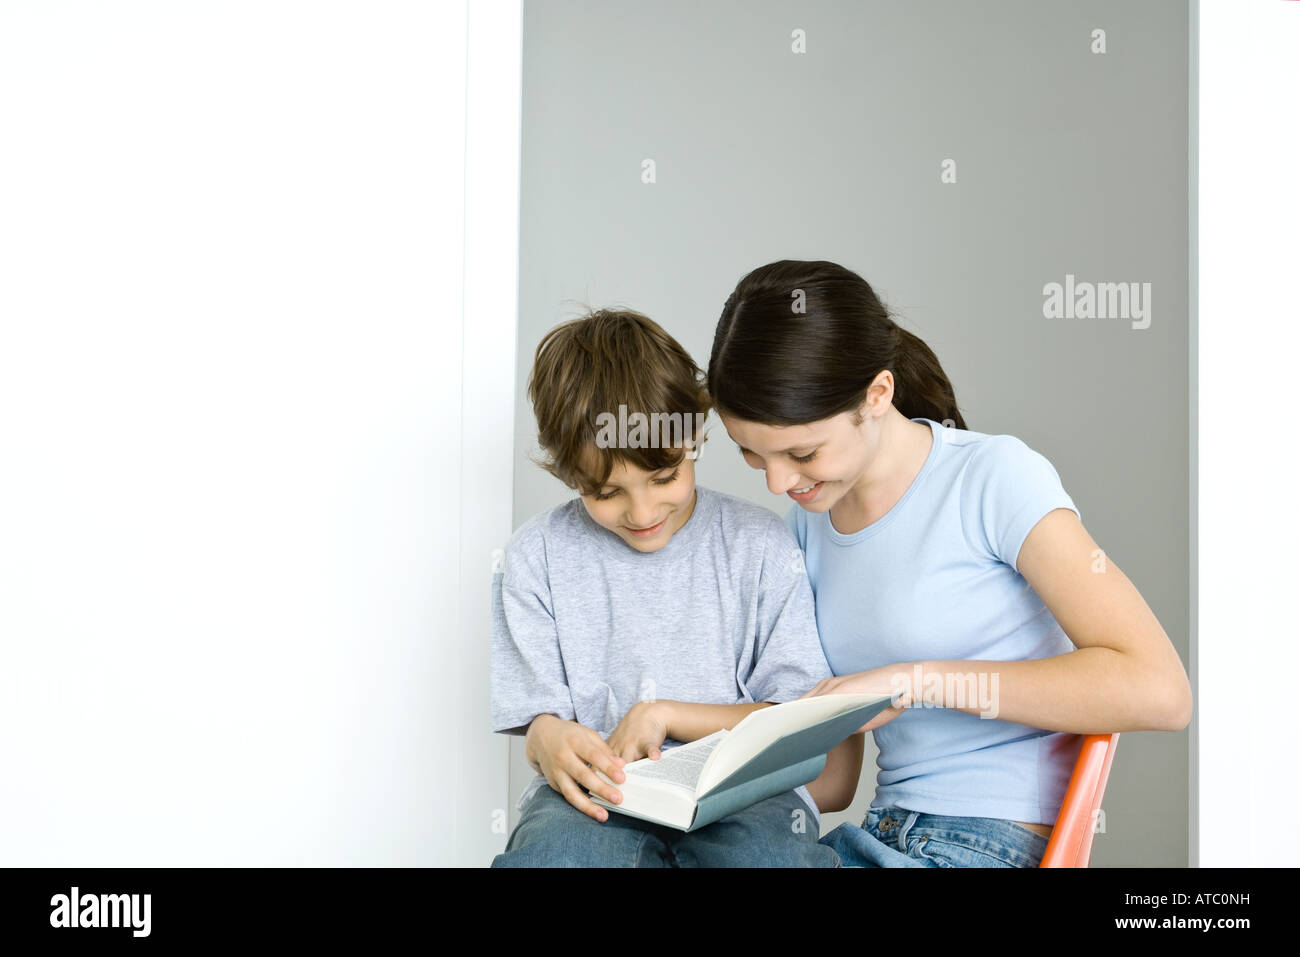 Brother and sister sitting, reading book together, both smiling Stock Photo